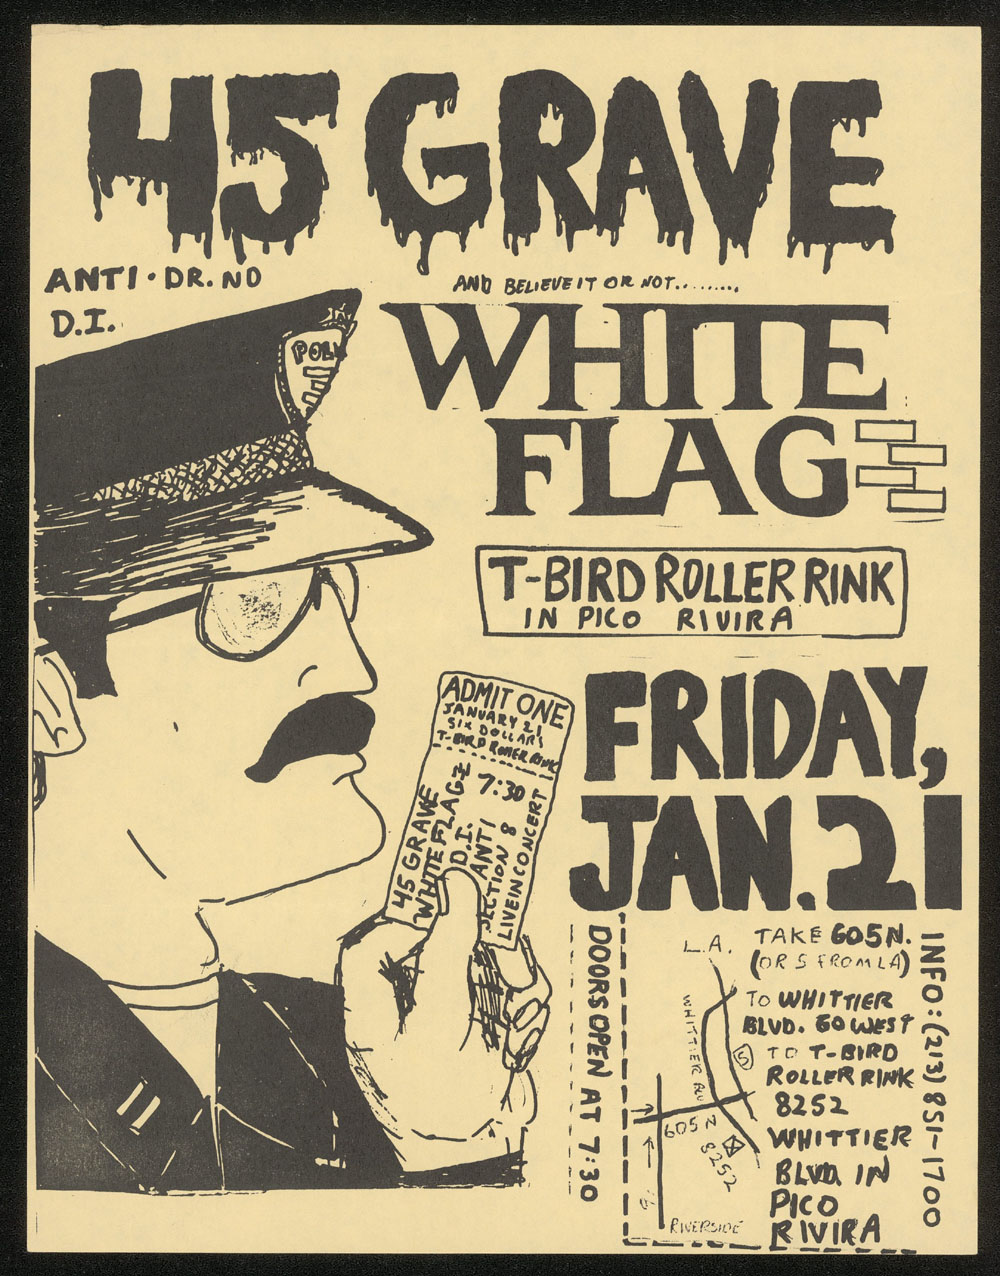 45 GRAVE w/ White Flag, Anti, Dr. Know, DI at T-Bird Roller Rink